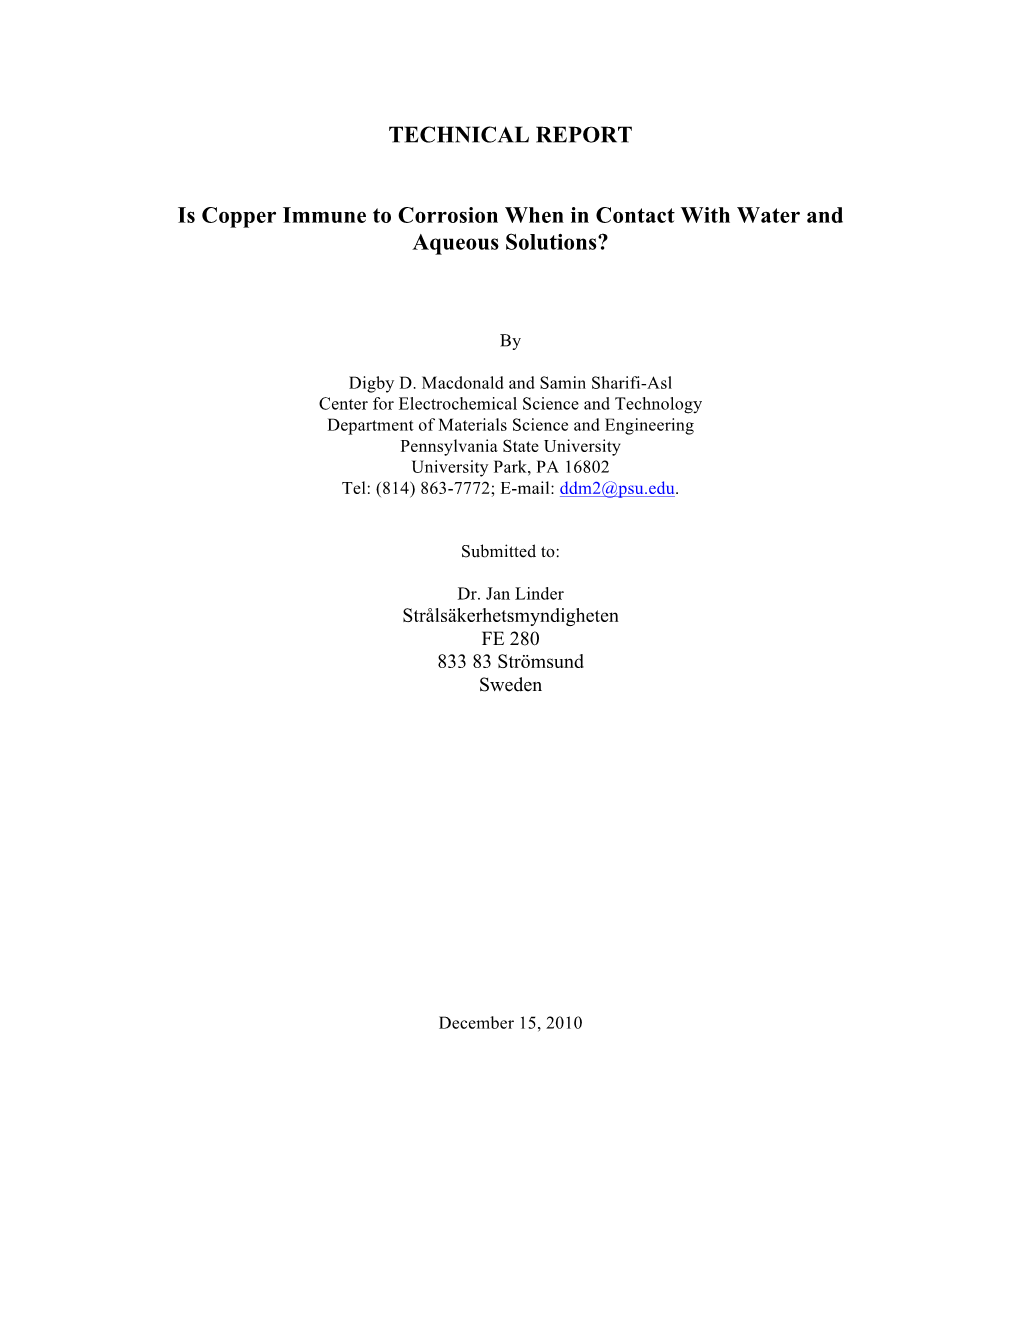 TECHNICAL REPORT Is Copper Immune to Corrosion When in Contact with Water and Aqueous Solutions?